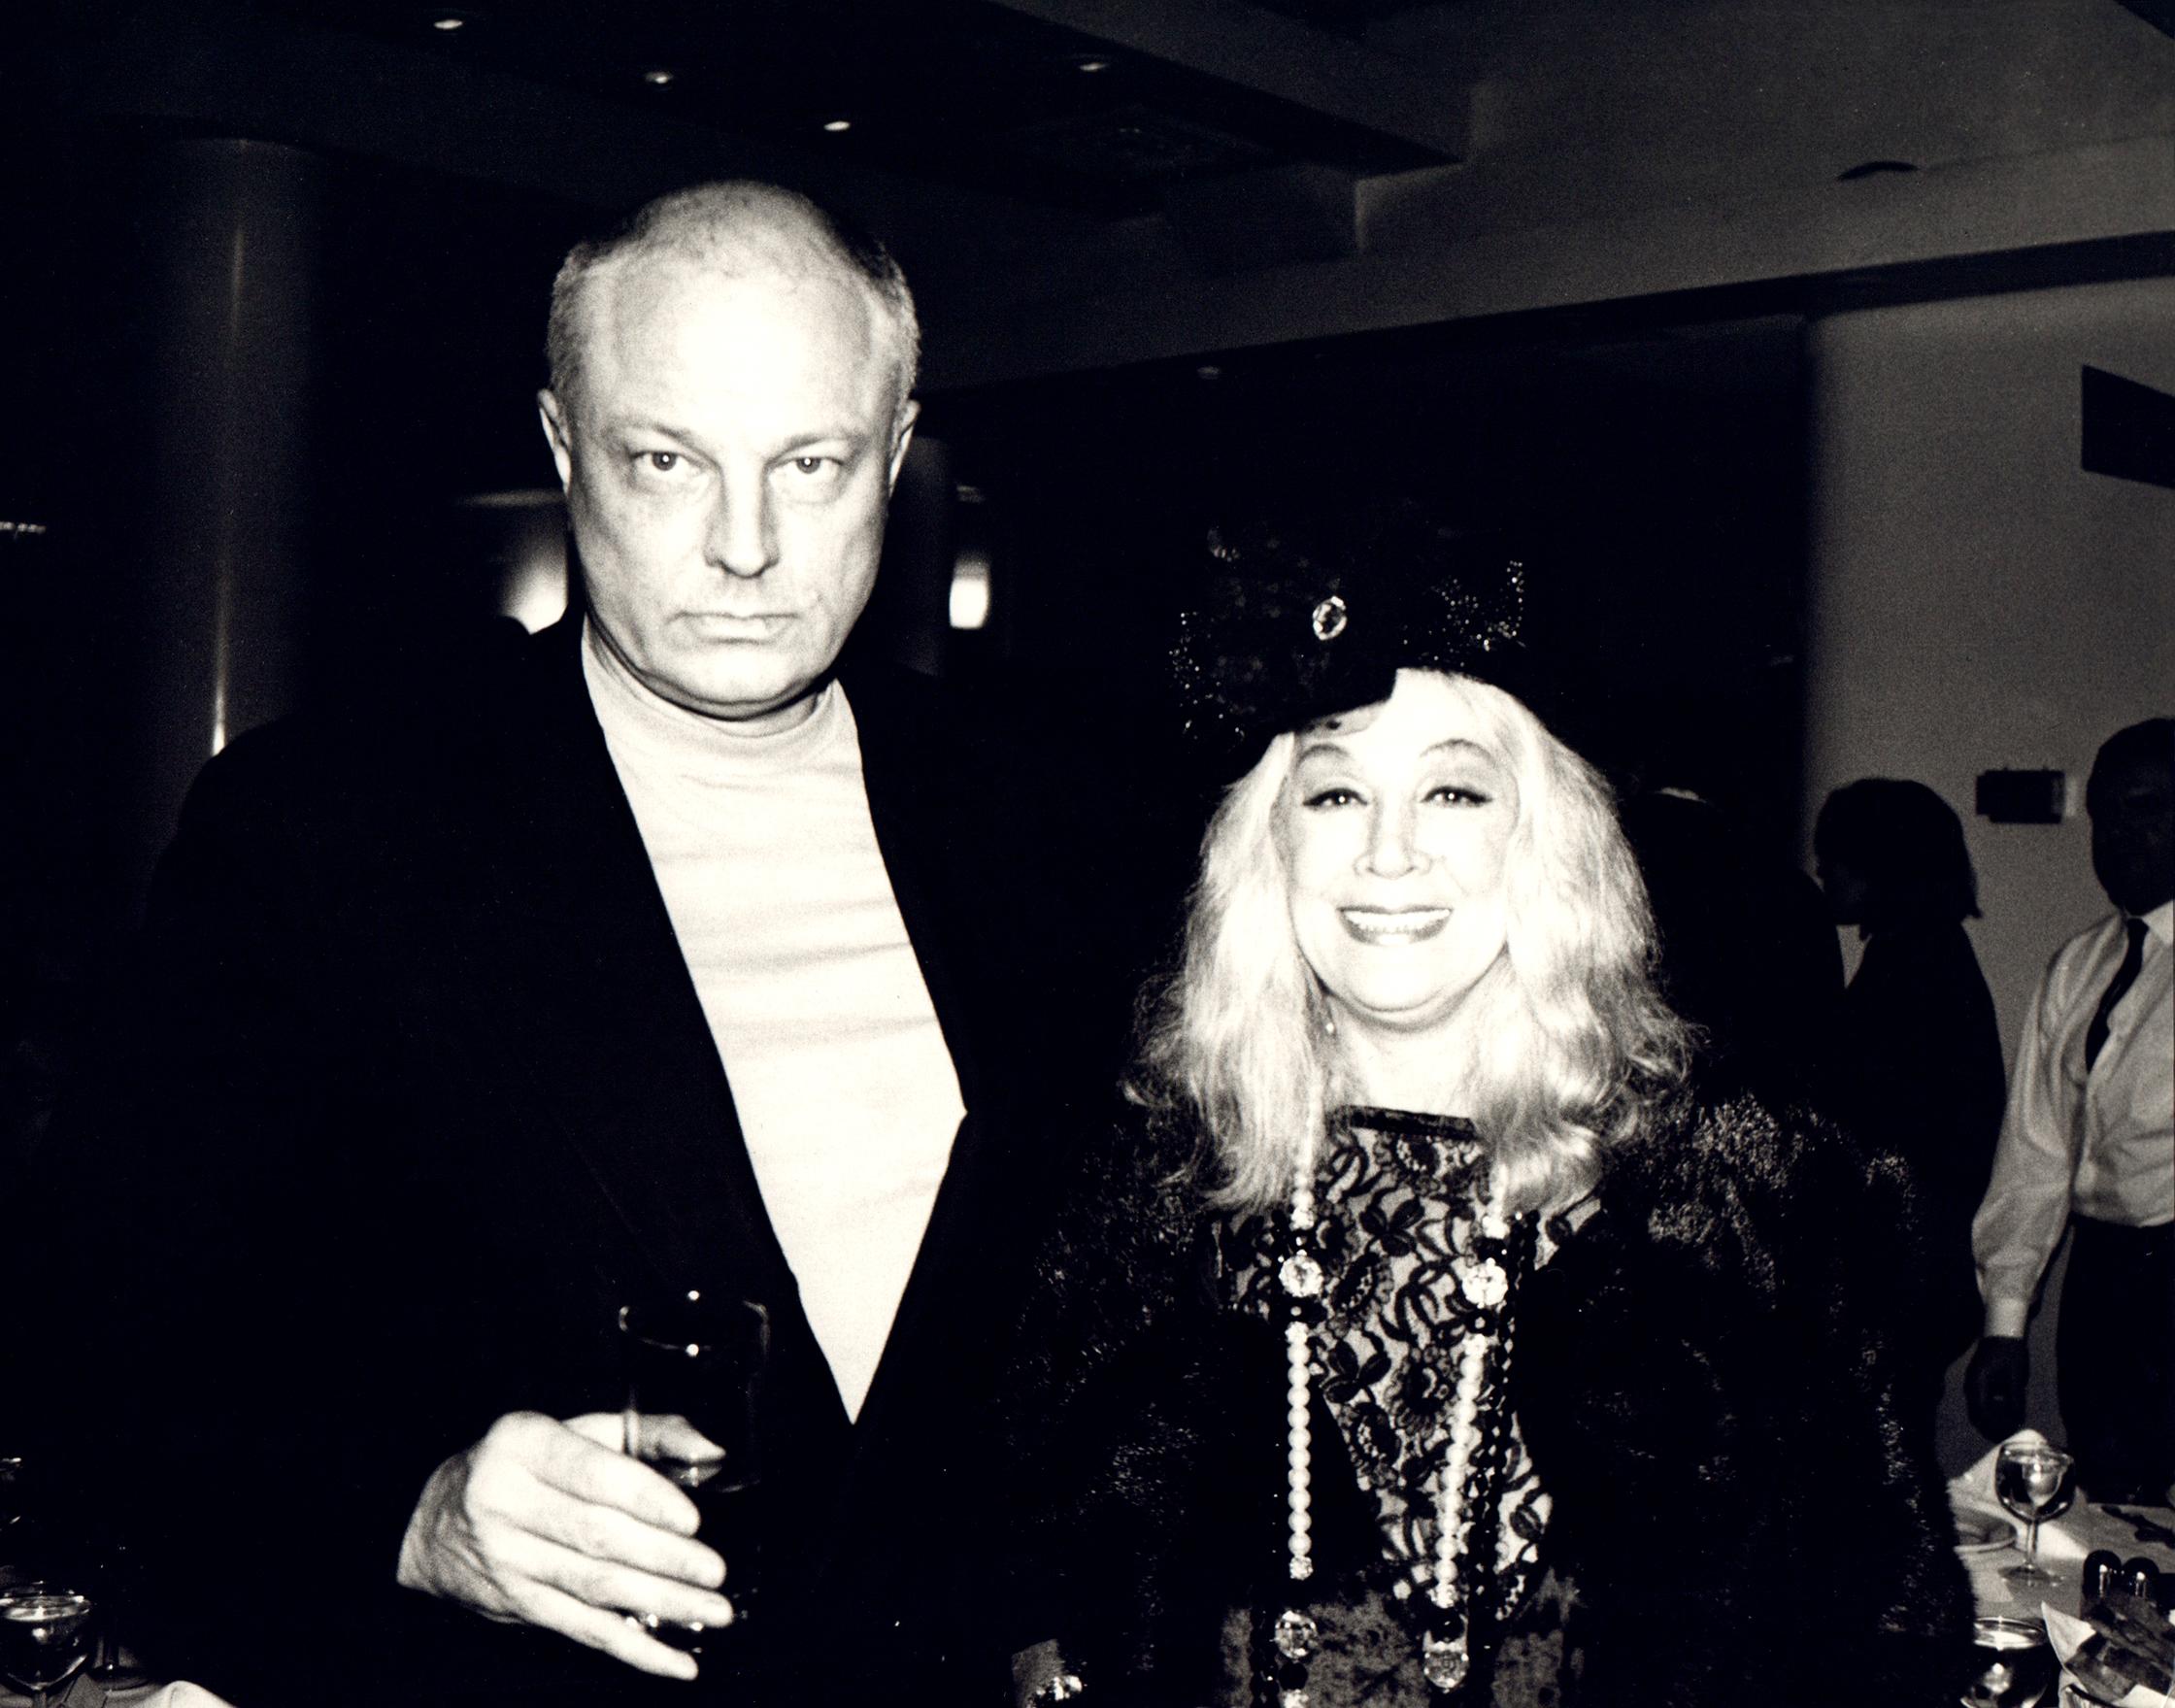 Andy Warhol Portrait Photograph - Nelson Lyon and Sylvia Miles